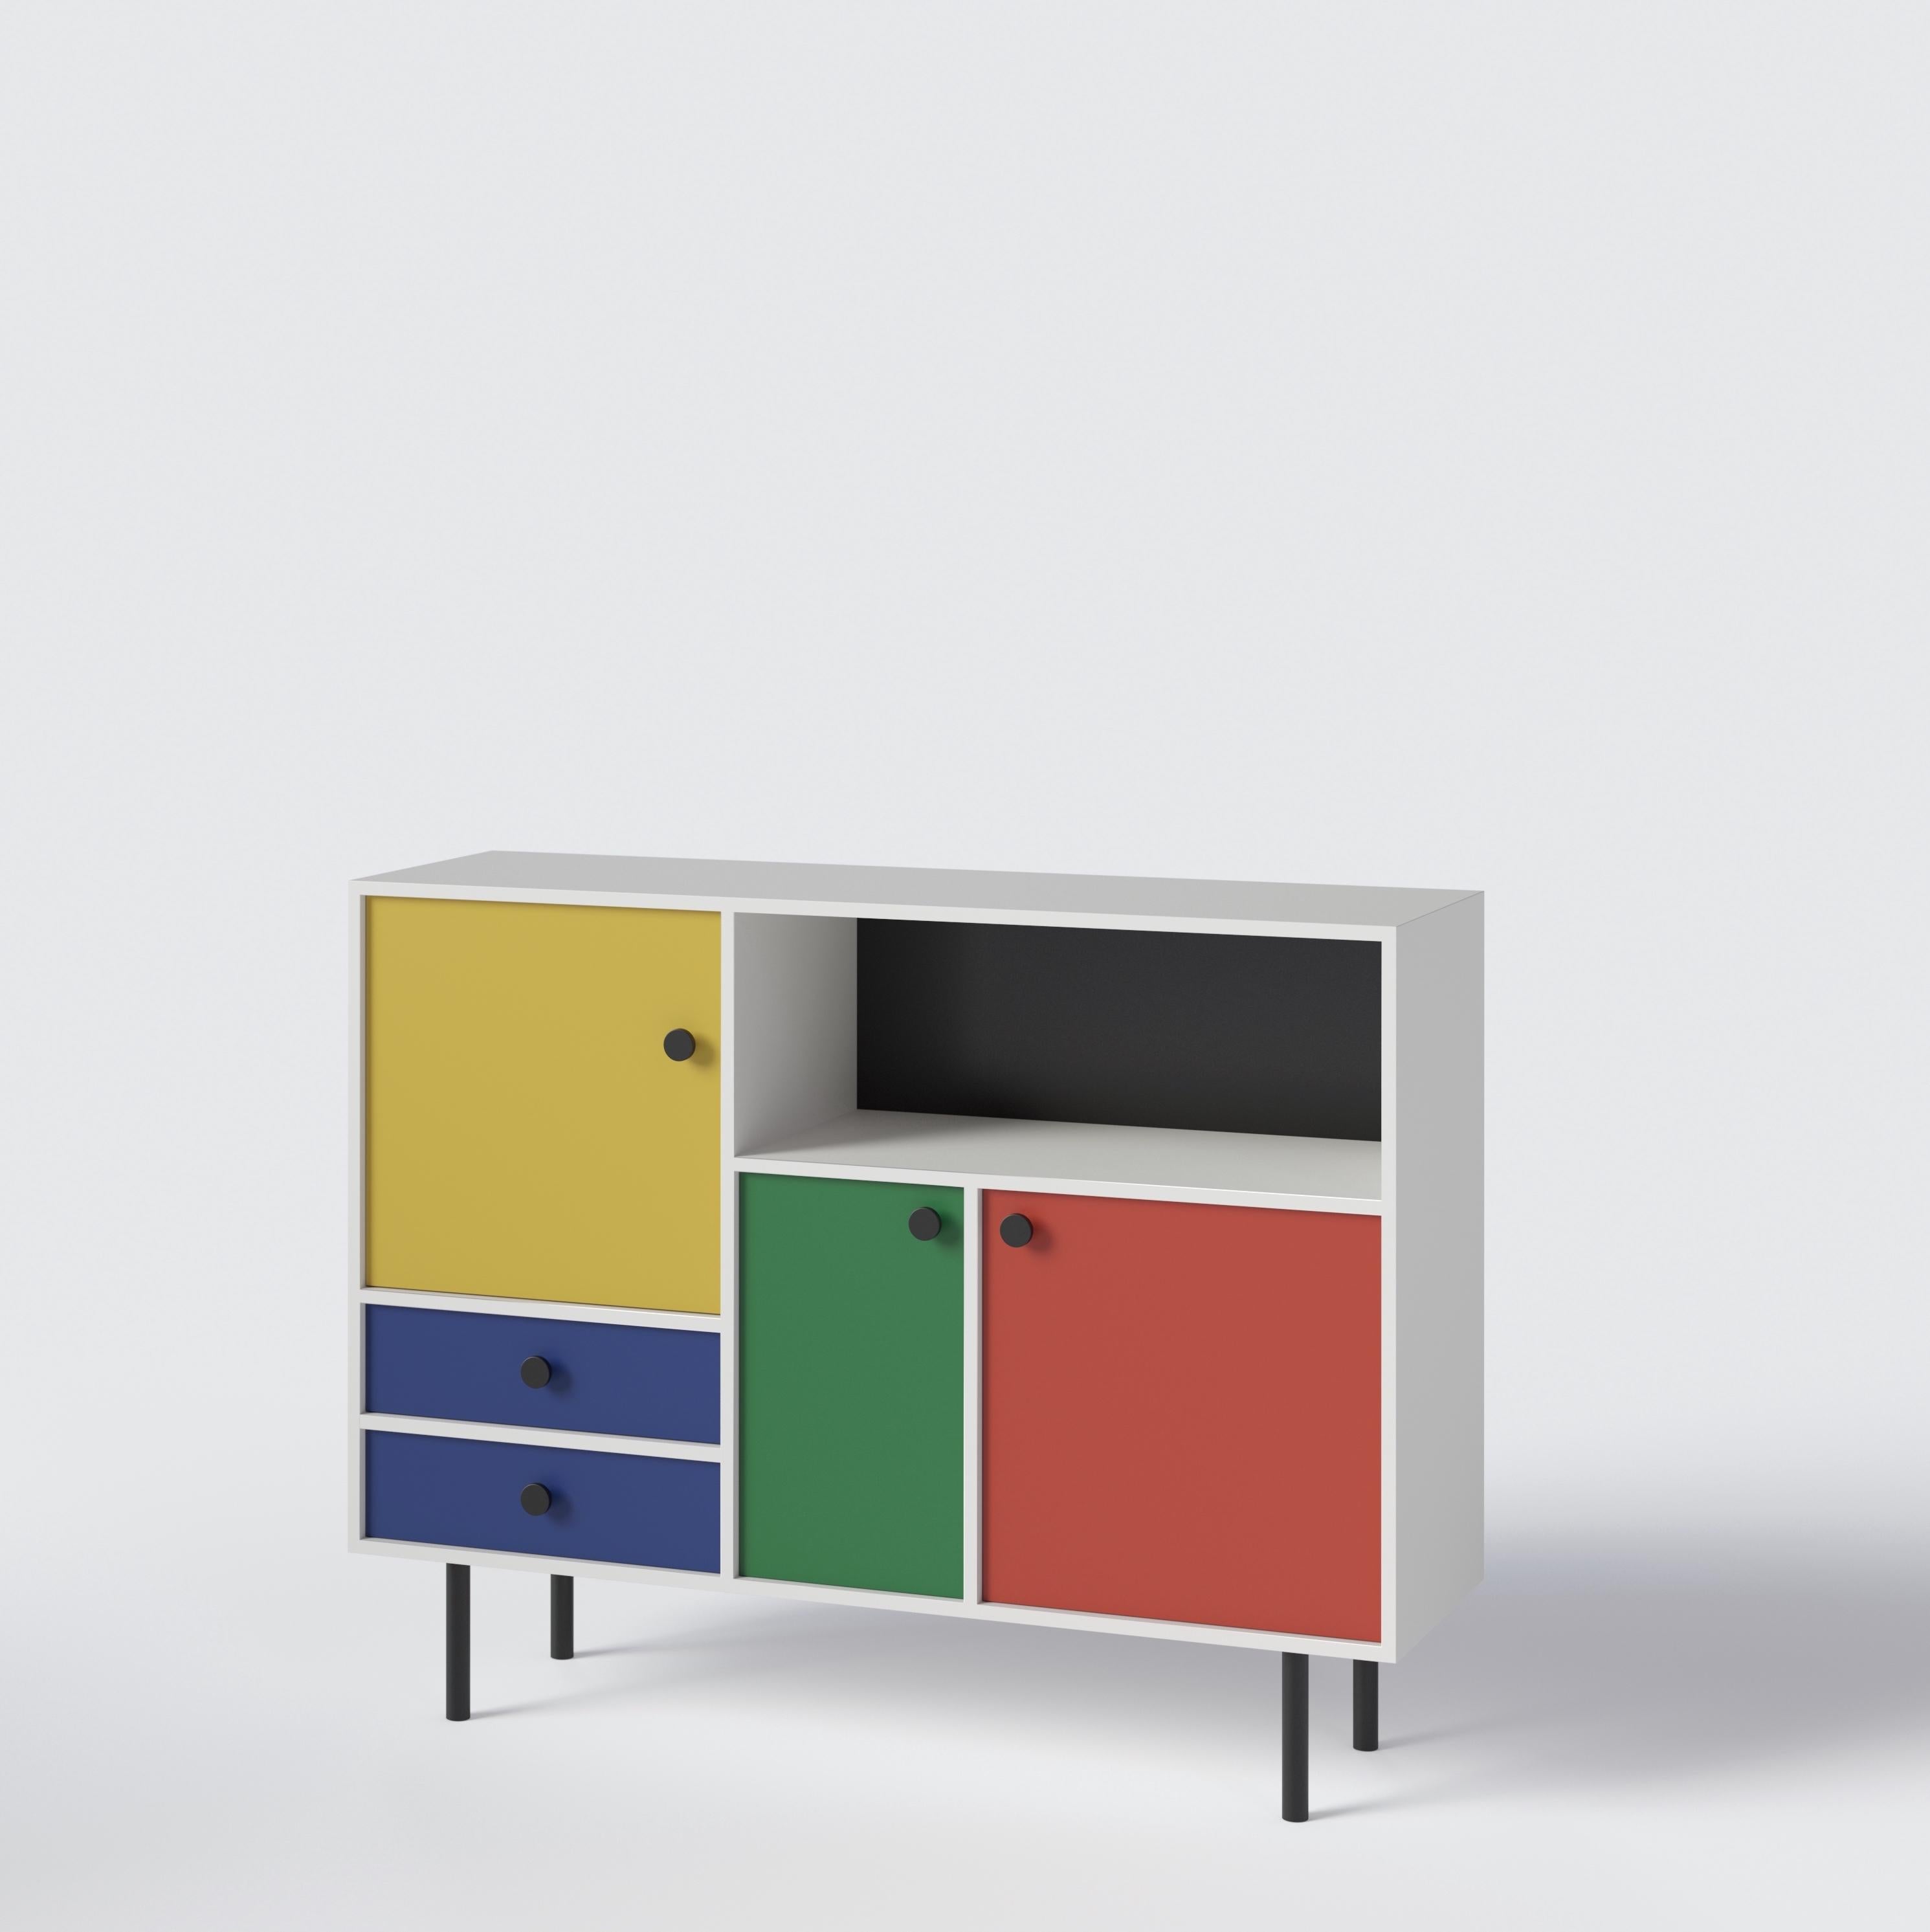 Geometric and Minimalist storage cabinet by Russian designer Dmitry Samygin. Inspired by Bauhaus style. 

High version (141cm)
Or
Low version (97cm)

Plywood
Measures: 97 x 146 x 39.5 cm

Choose your color!